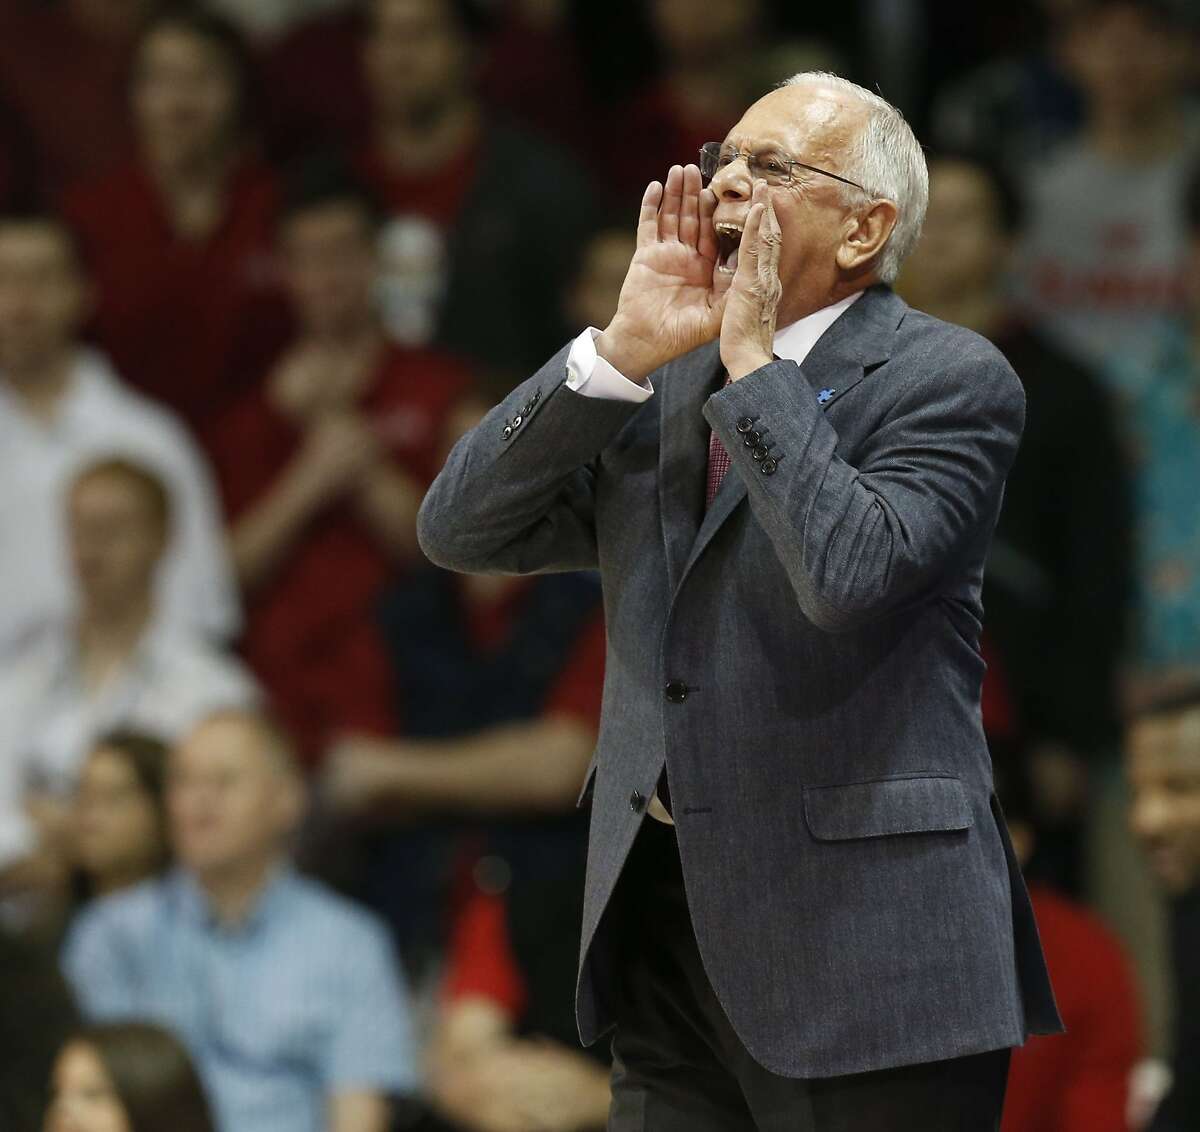 Southern Methodist coach Larry Brown during action against Memphis at Moody Coliseum in Dallas on Saturday, Feb. 1, 2014. SMU won, 87-72. (Michael Ainsworth/Dallas Morning News/MCT)